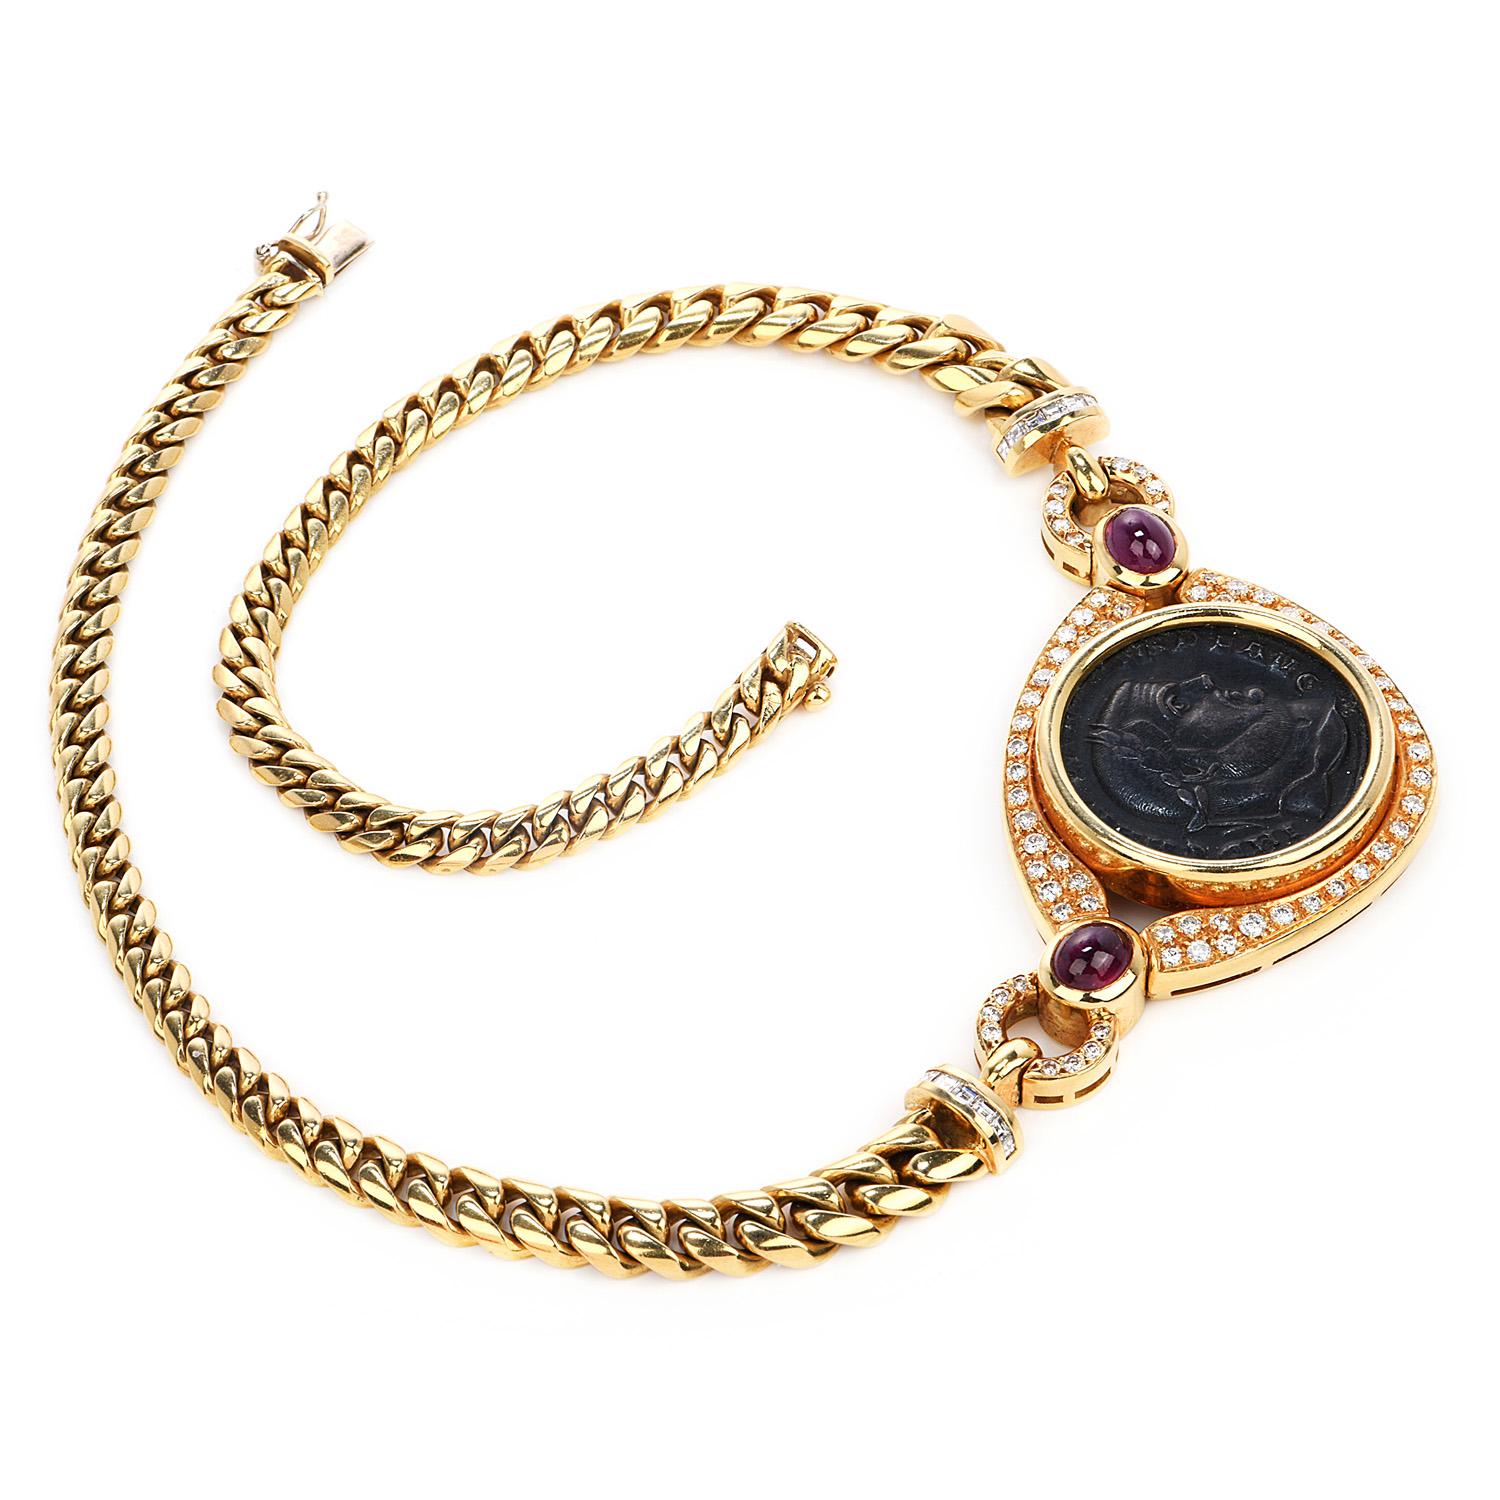 This  1980's solid 18k gold and diamond ruby Corinth pendant necklace with heavy solid 18k yellow gold curb-link chain is in excellent condition. This vintage coin is bezel set in an 18k yellow gold bezel surrounded by 1.50 carats of the round